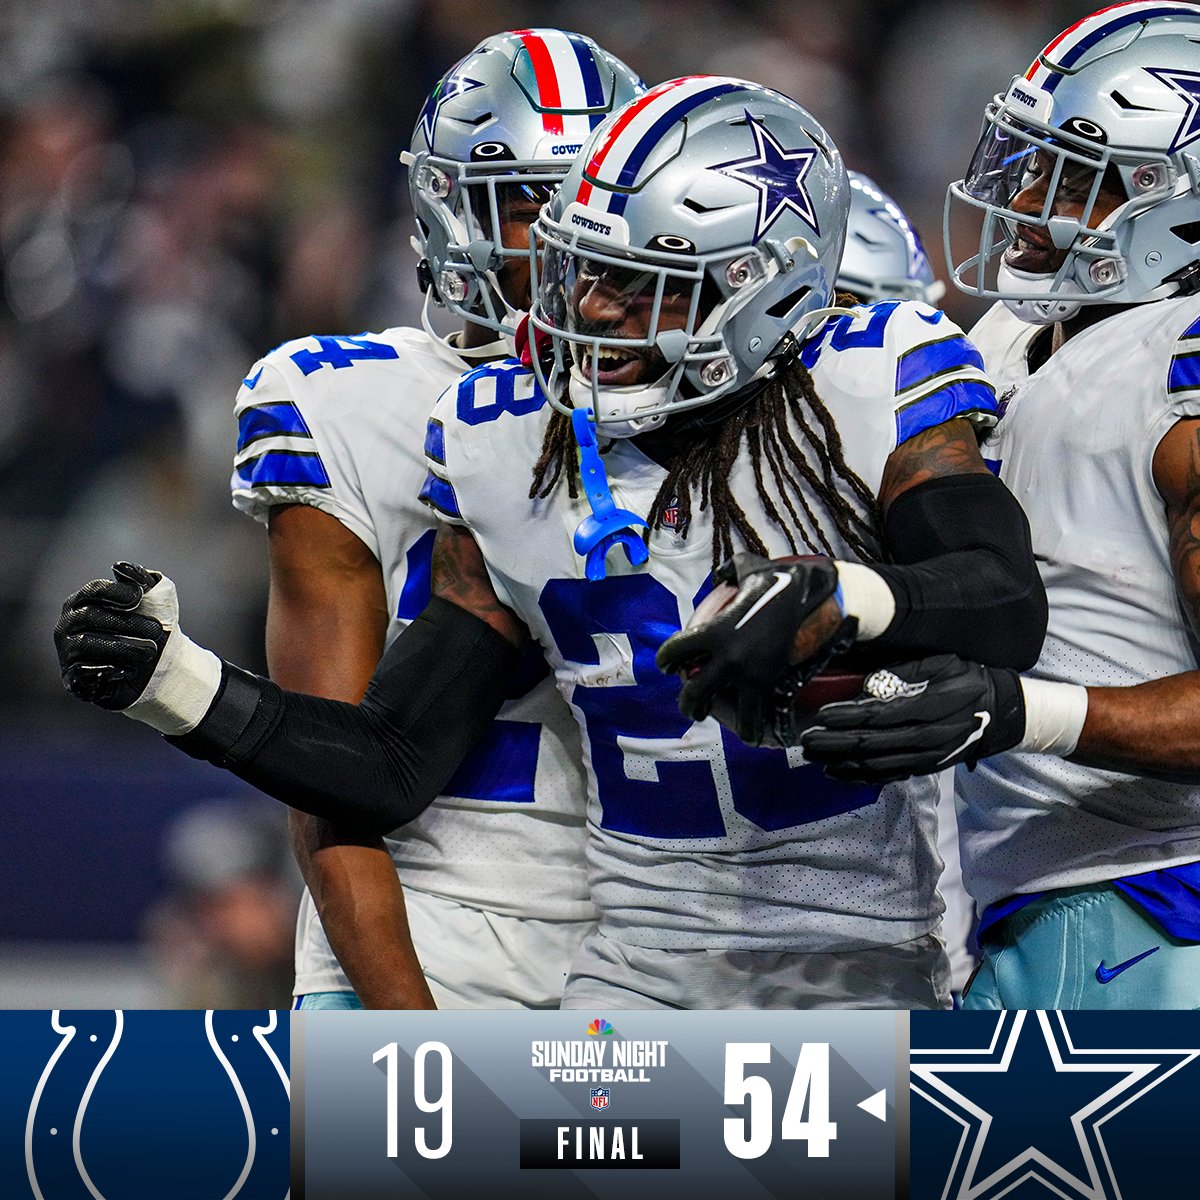 FINAL: @dallascowboys put up 54 points and force 5 turnovers on SNF! #INDvsDAL